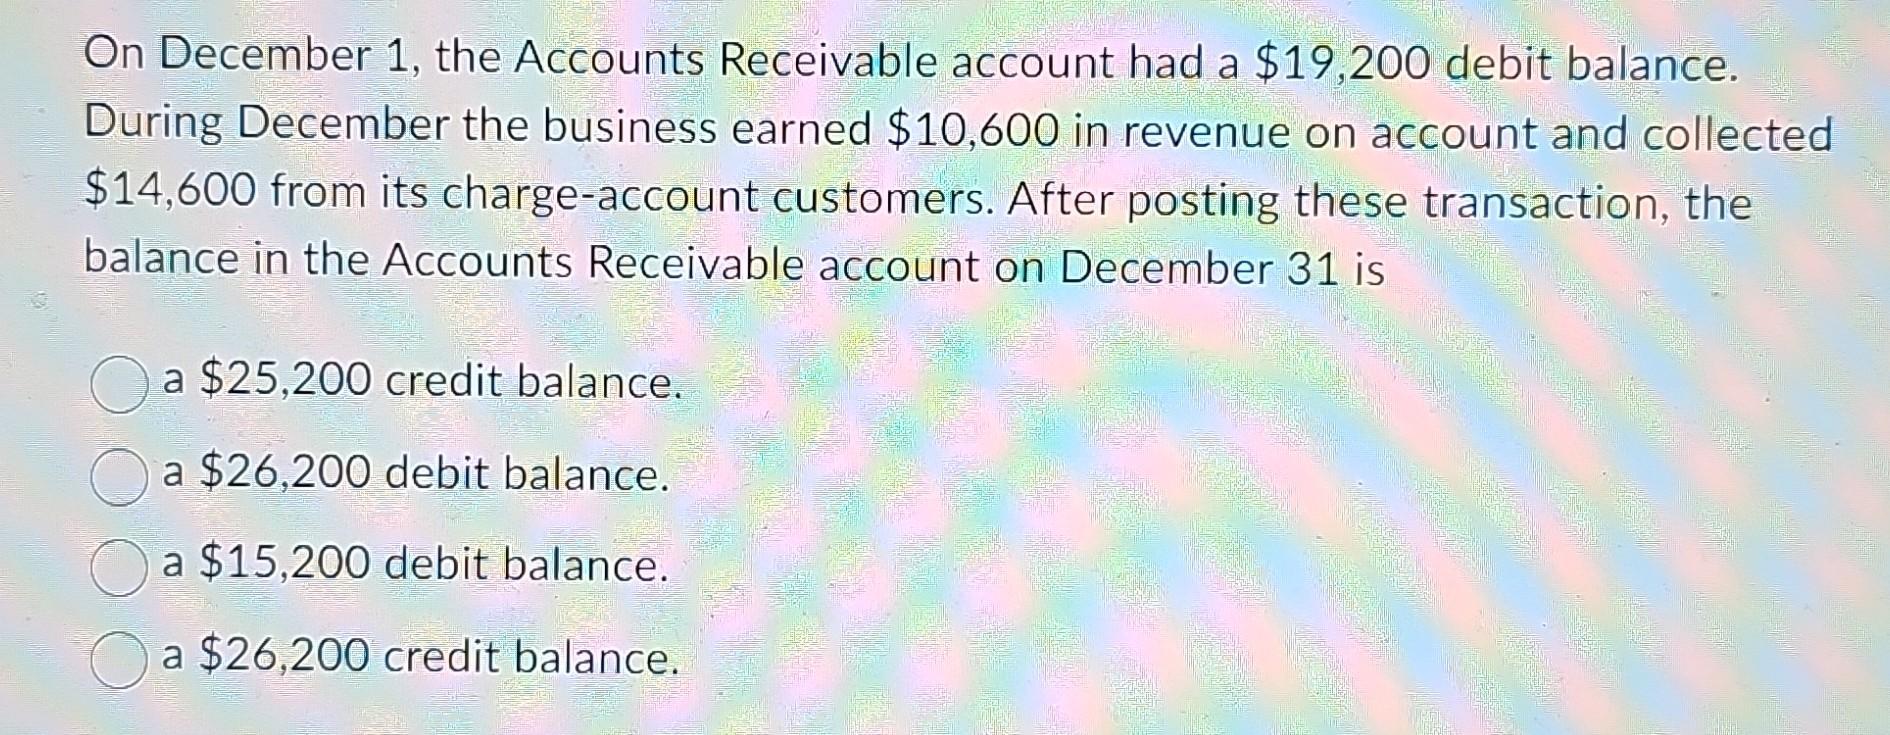 On December 1, the Accounts Receivable account had a $19,200 debit balance. During December the business